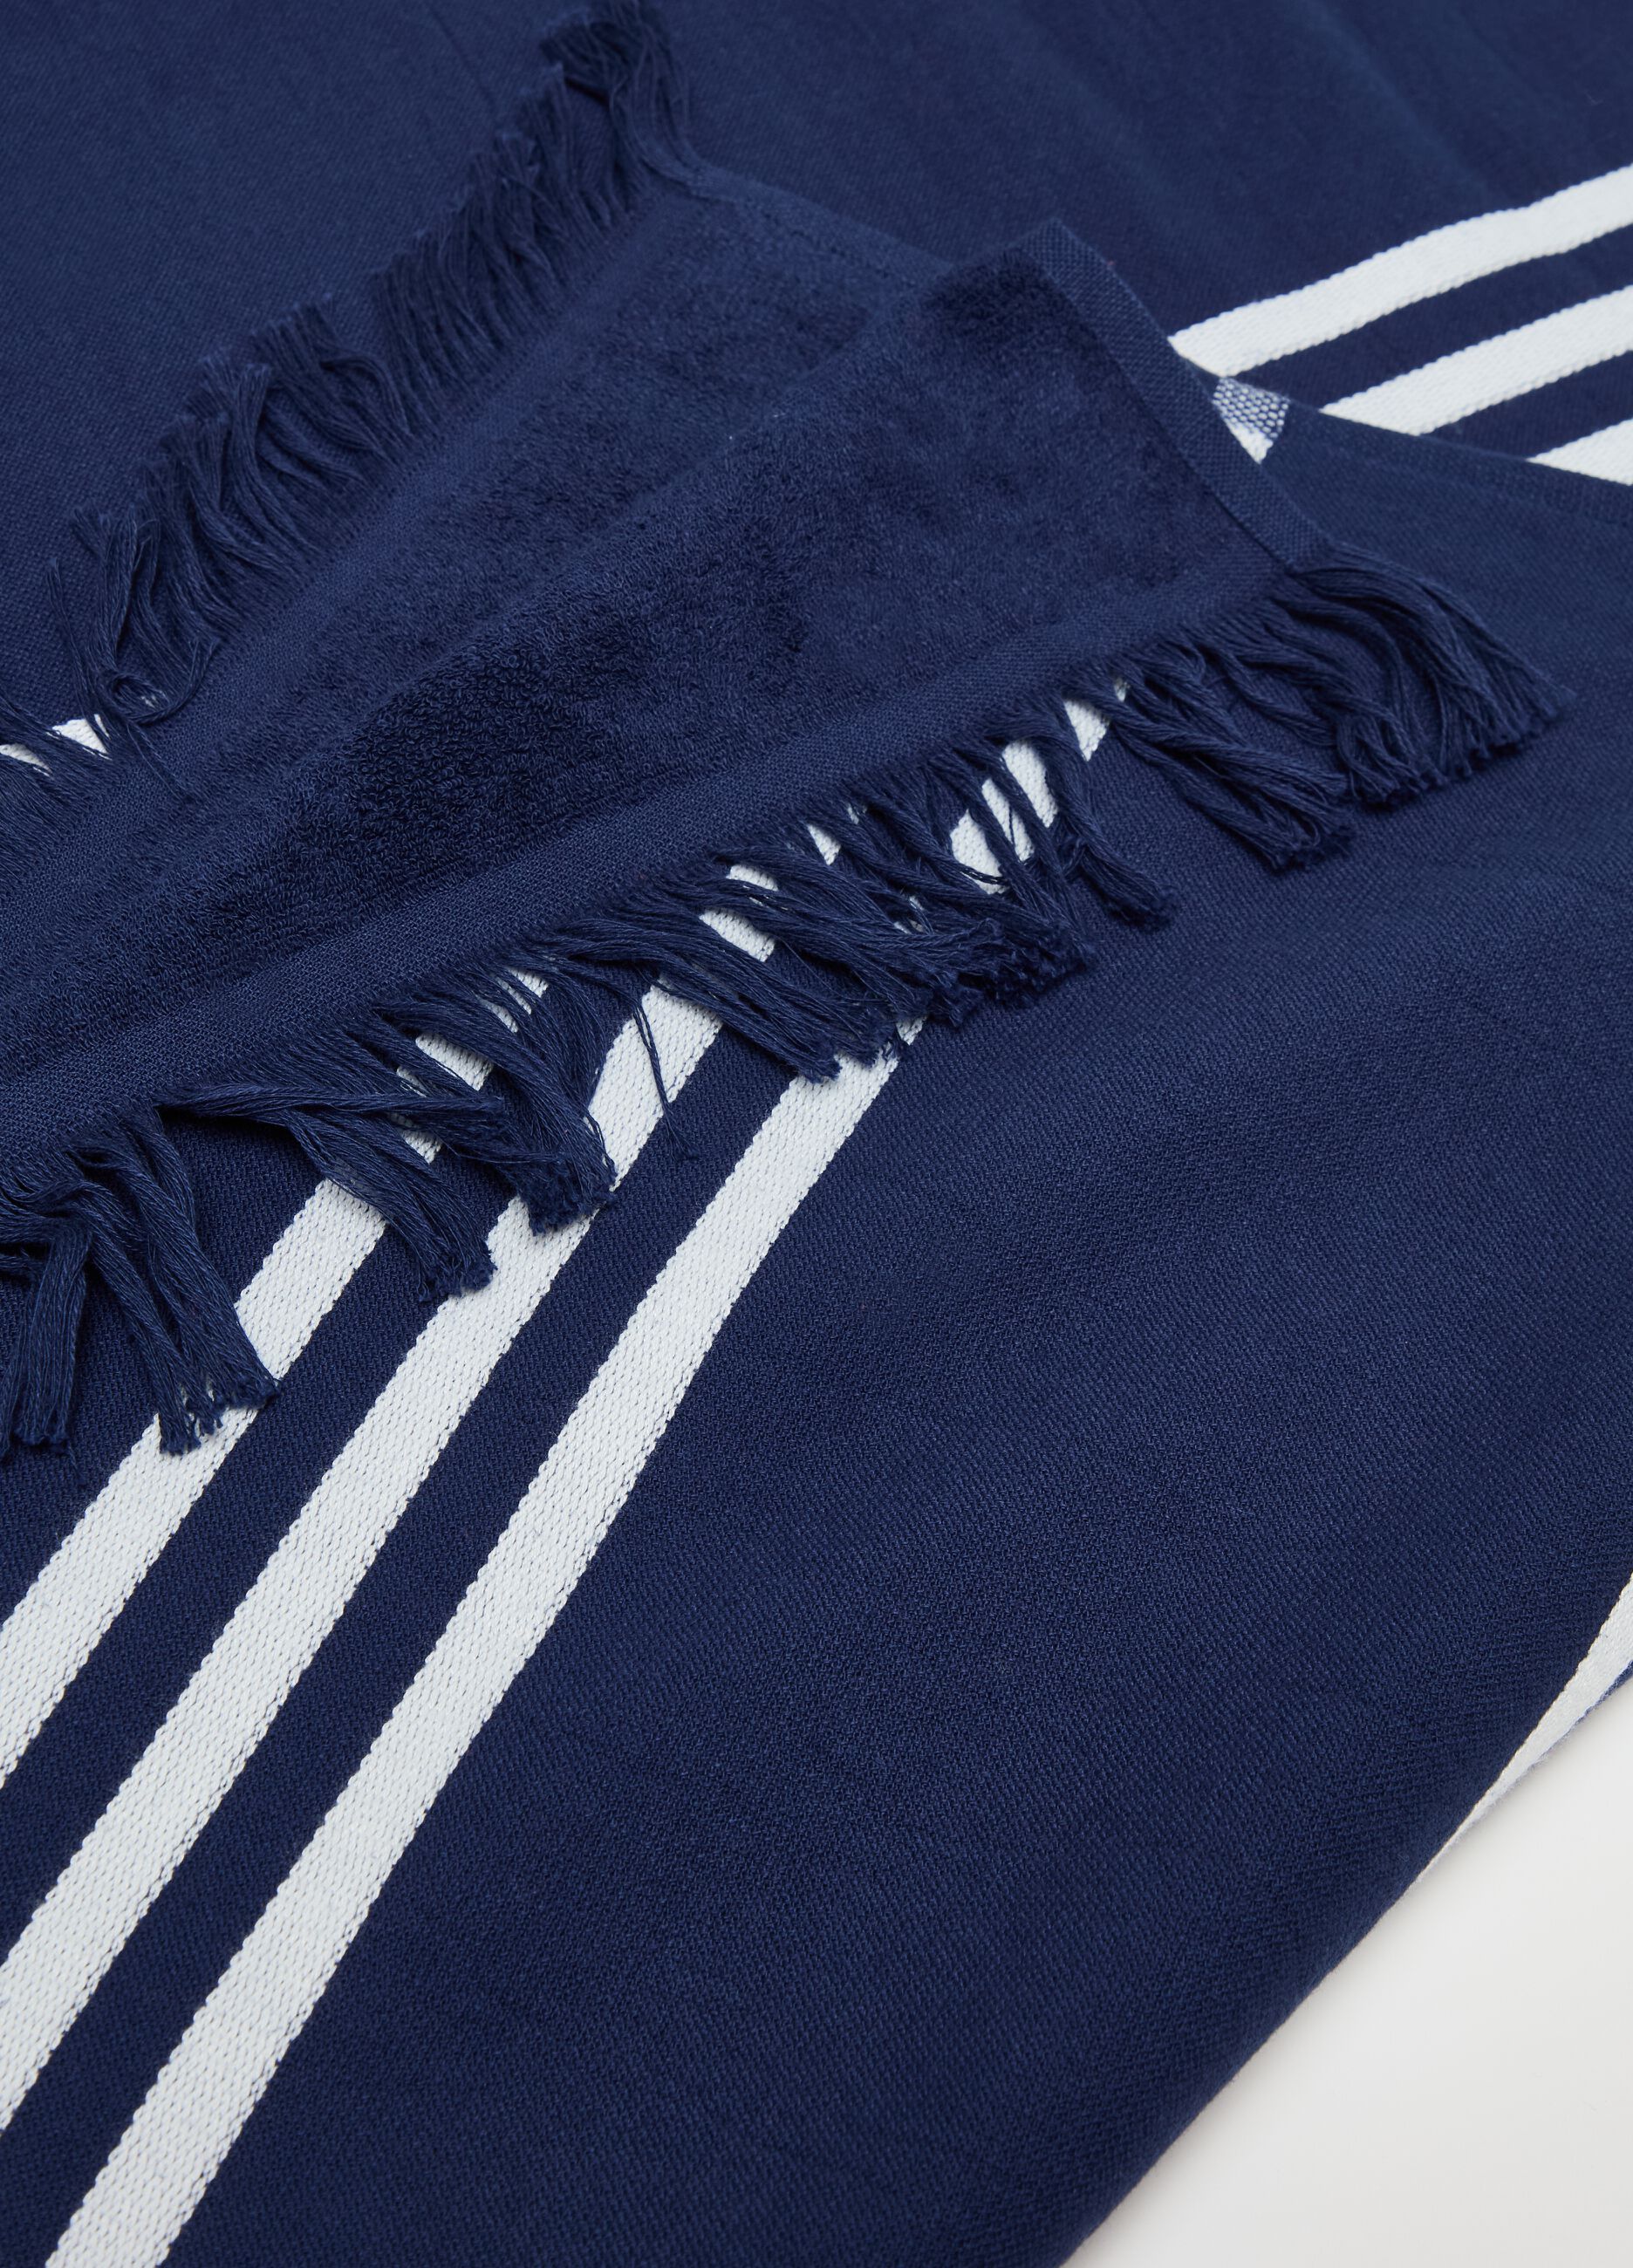 Beach towel with thin stripes and fringing